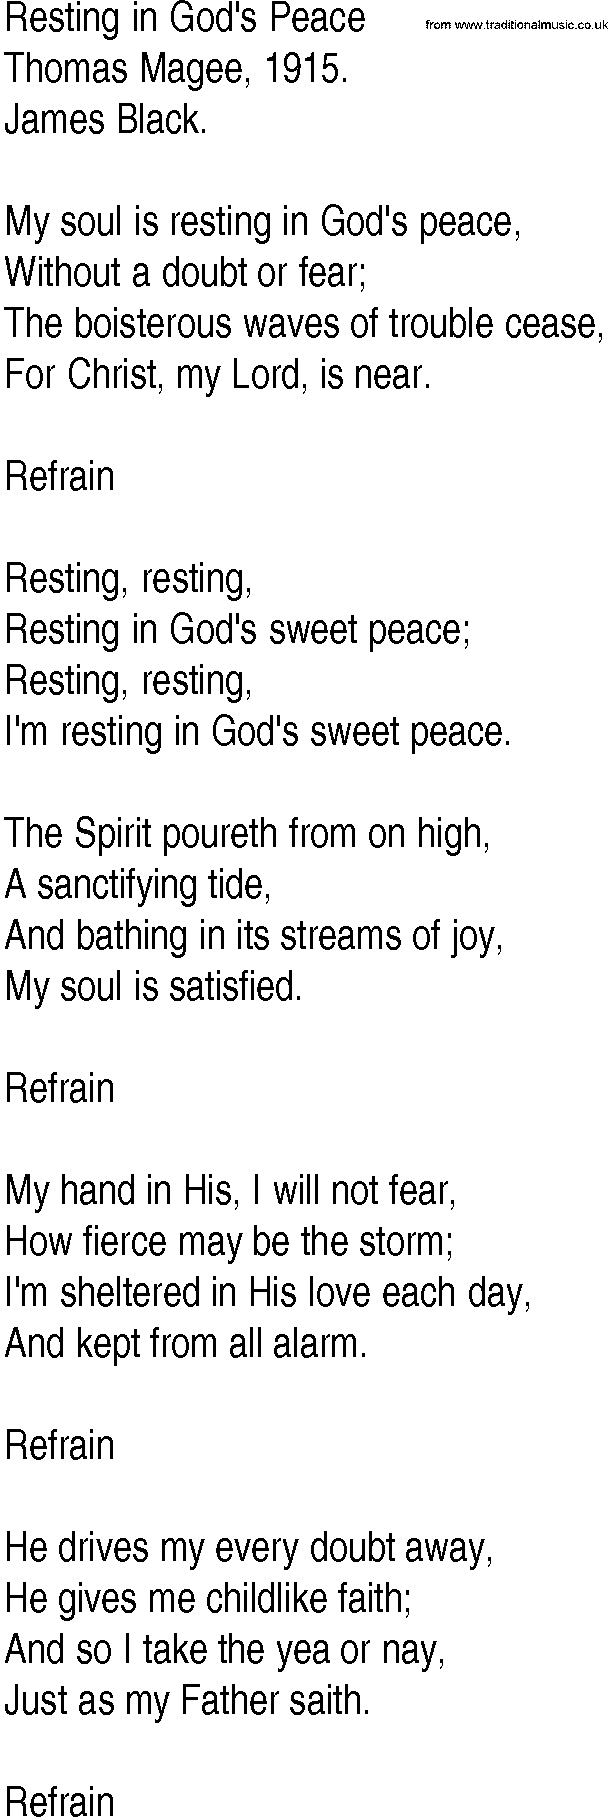 Hymn and Gospel Song: Resting in God's Peace by Thomas Magee lyrics